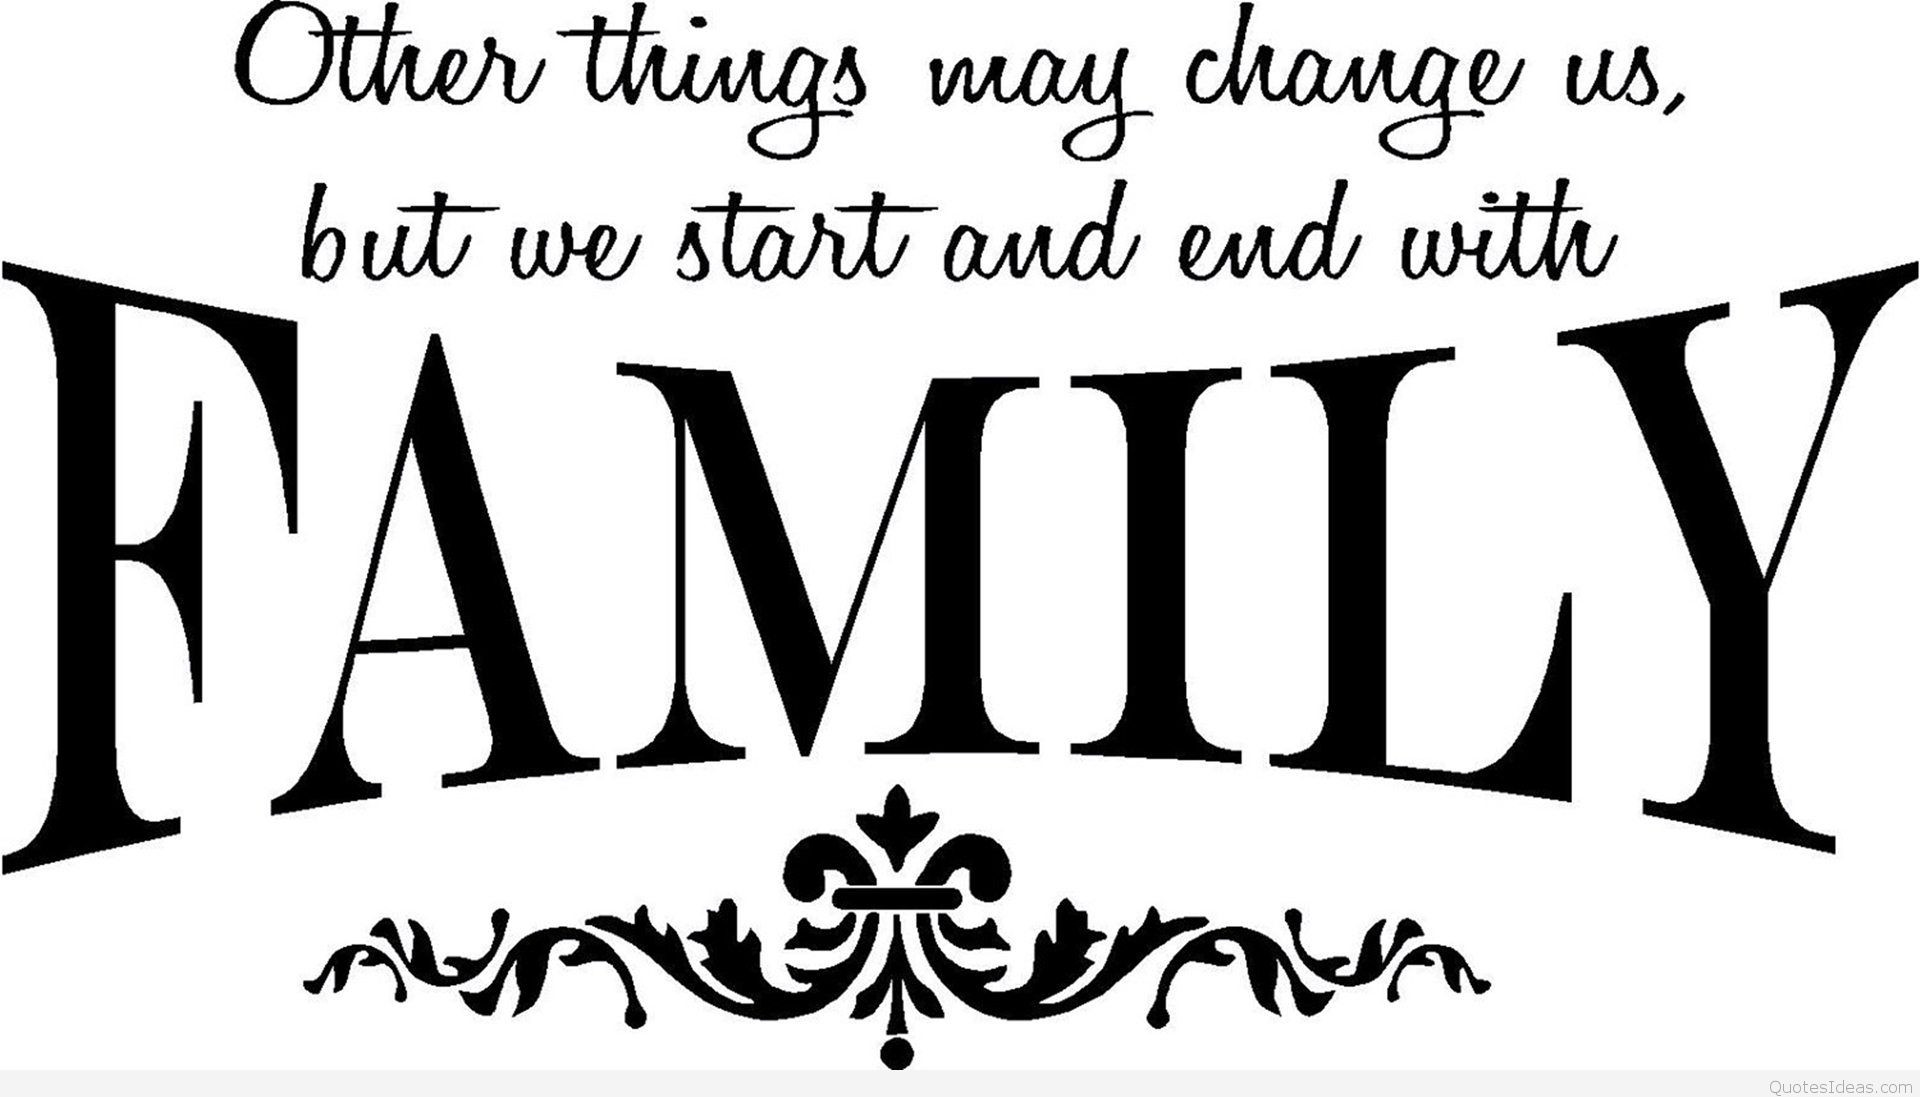 Family Image Quotes
 Cute cover family quote 2015 inspiring